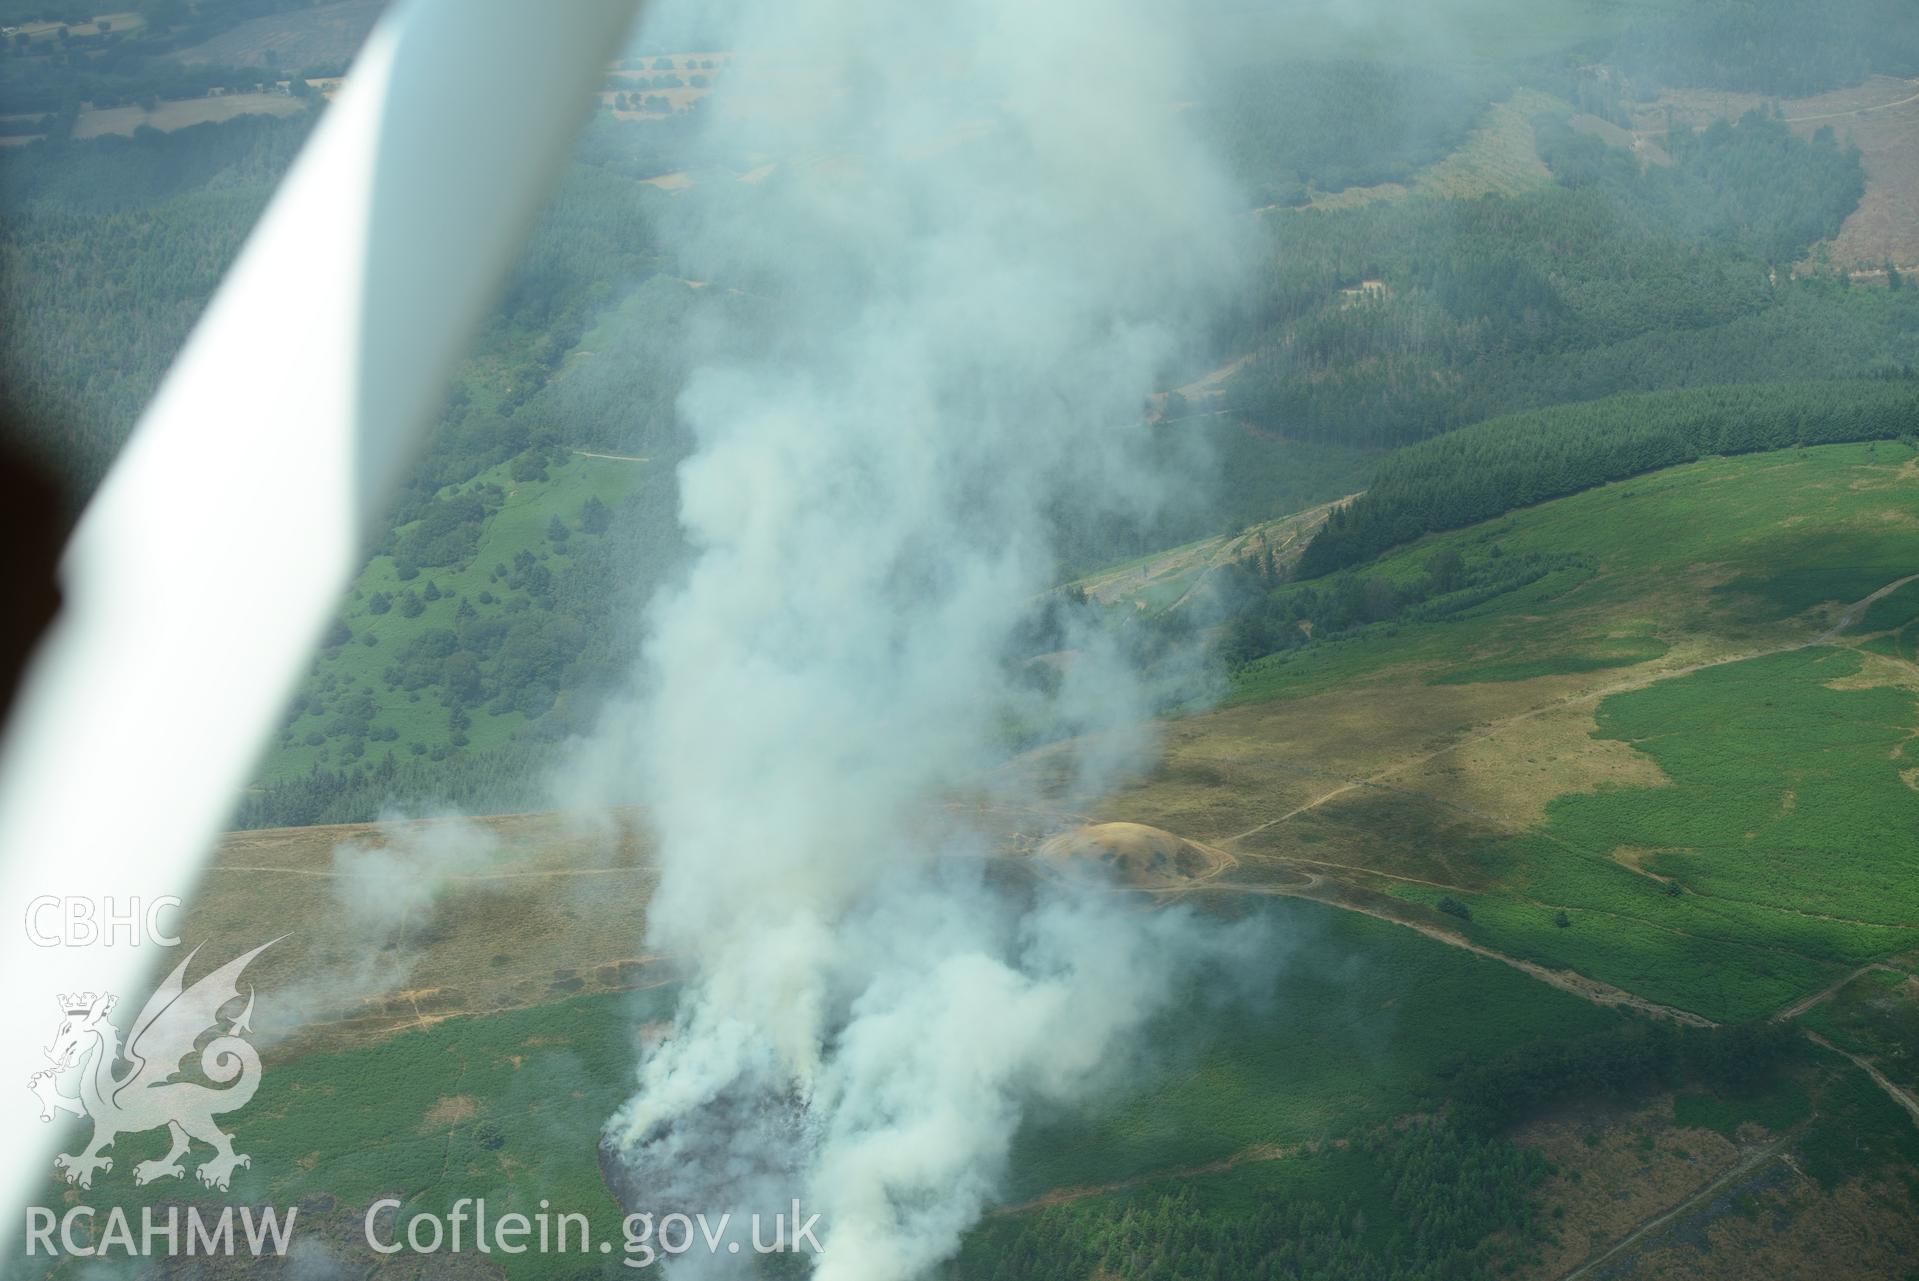 Royal Commission aerial photography of Twmbarlwm motte and bailey during a fire taken on 19th July 2018 during the 2018 drought. The photograph is taken through the window of the aircraft due to the pilot following a flight path to avoid the smoke.